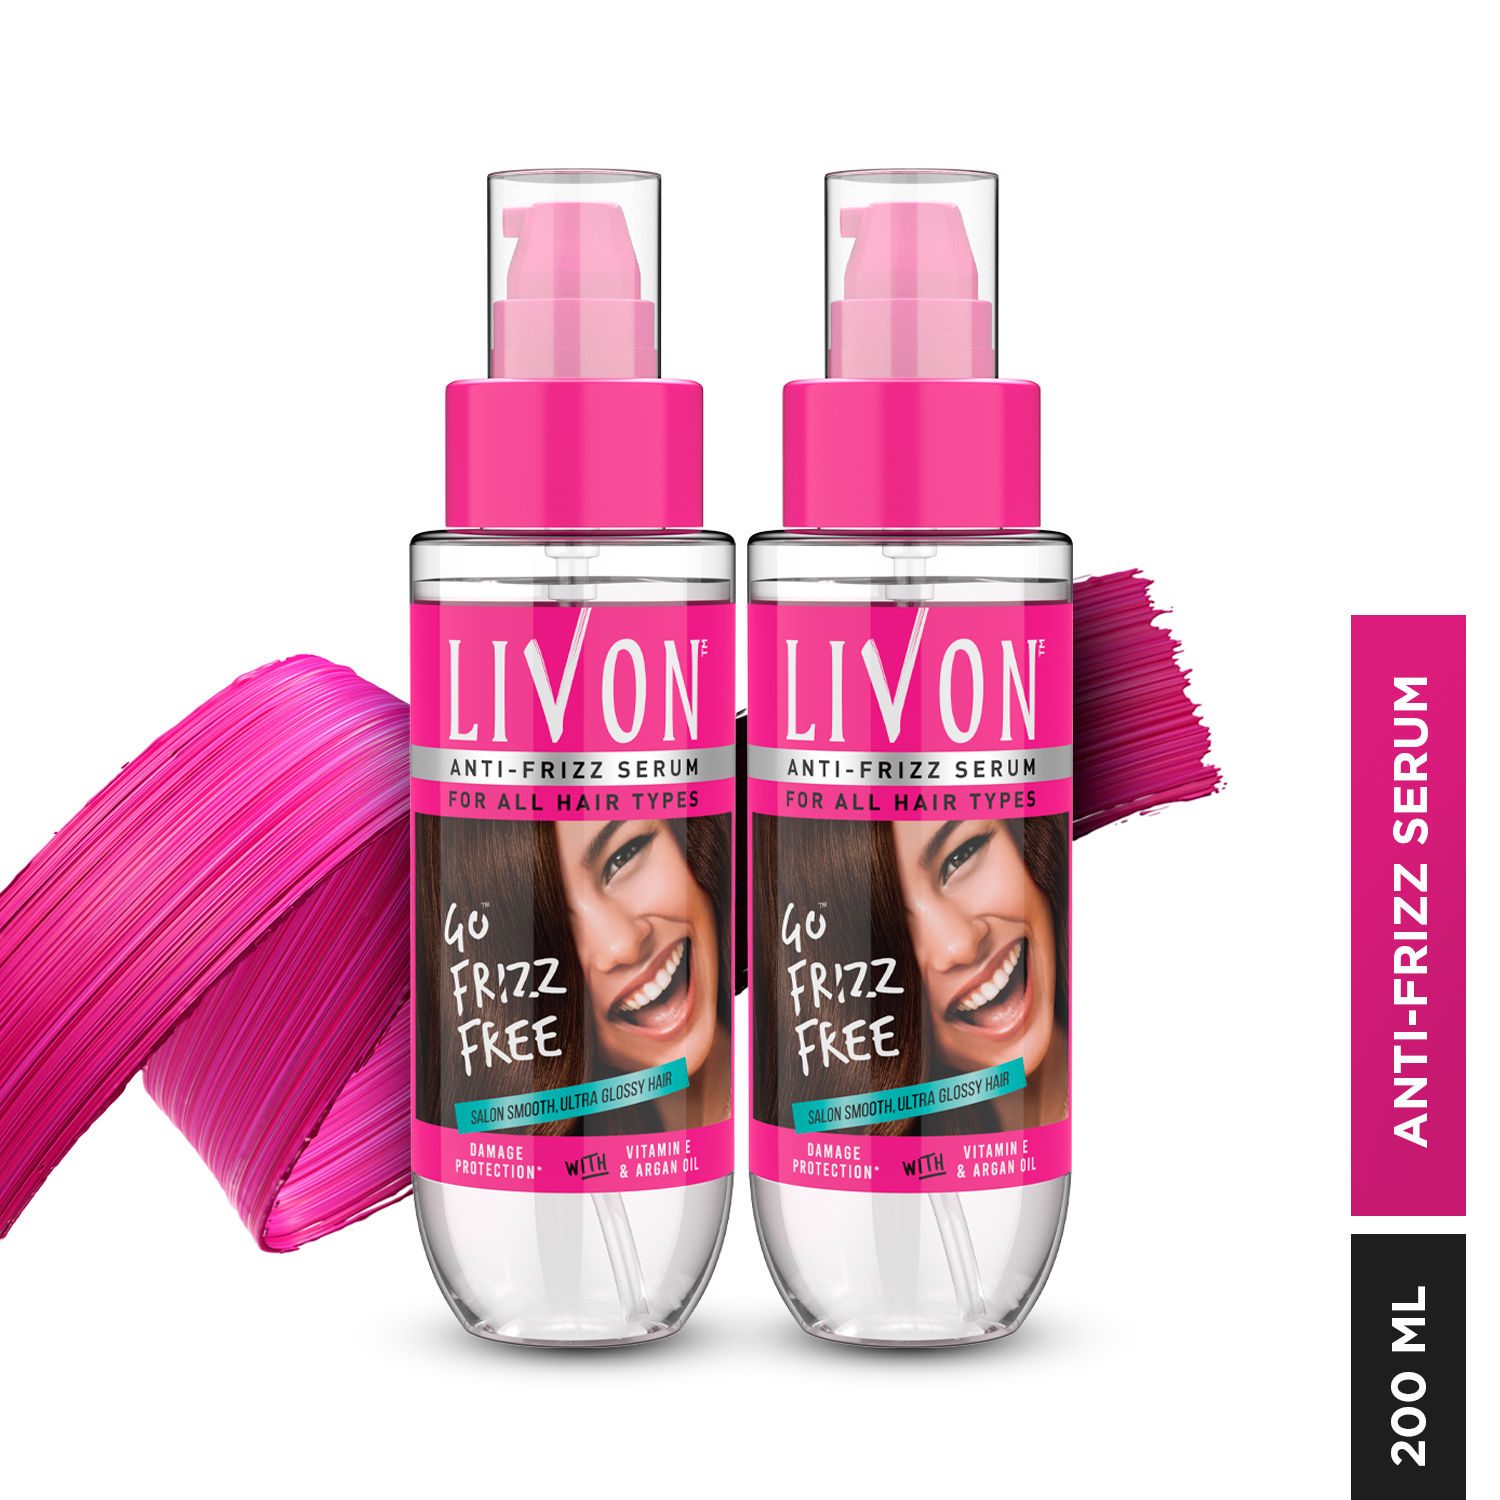 Livon Hair Serum for Women | All Hair Types |Smooth, Frizz free & Glossy Hair |(Pack of 2)